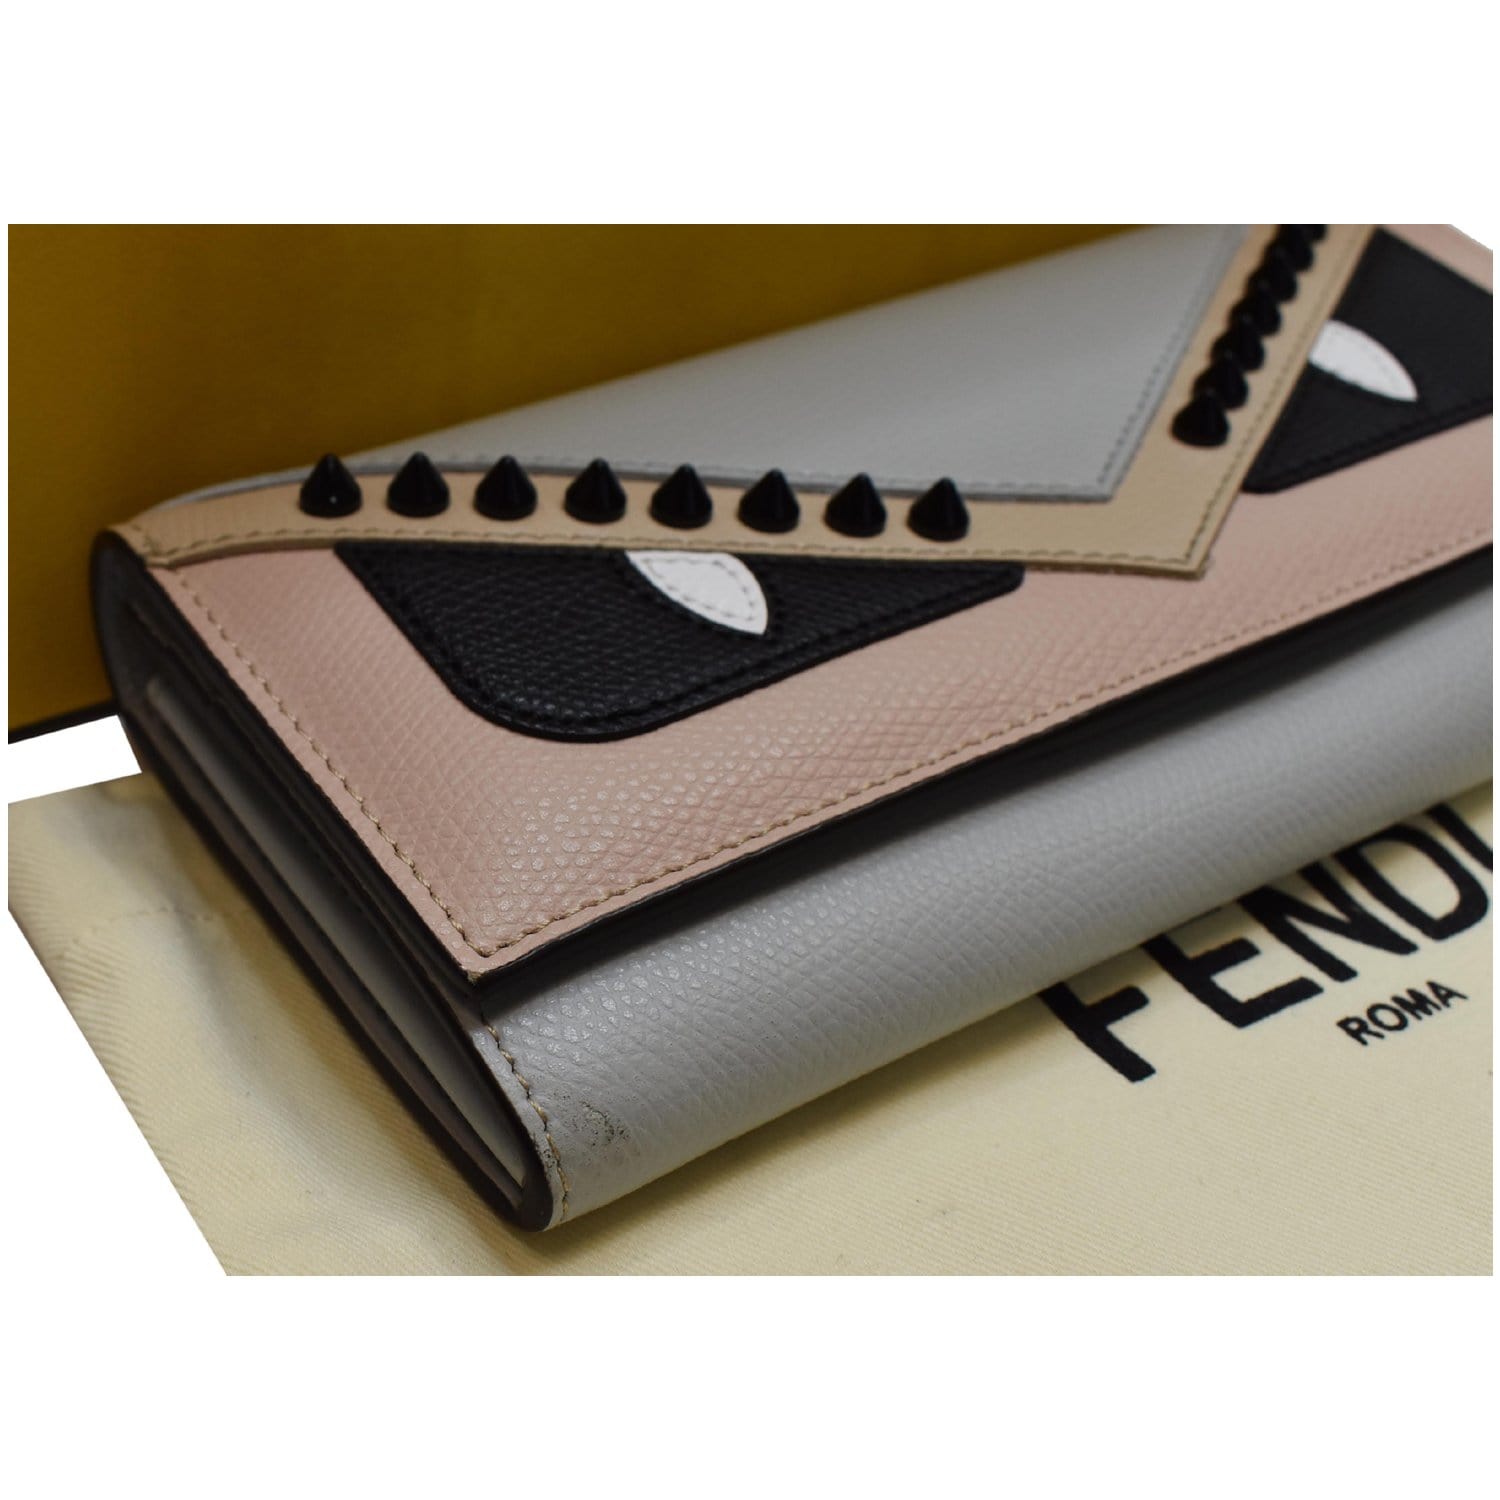 Fendi Continental Wallet on Chain